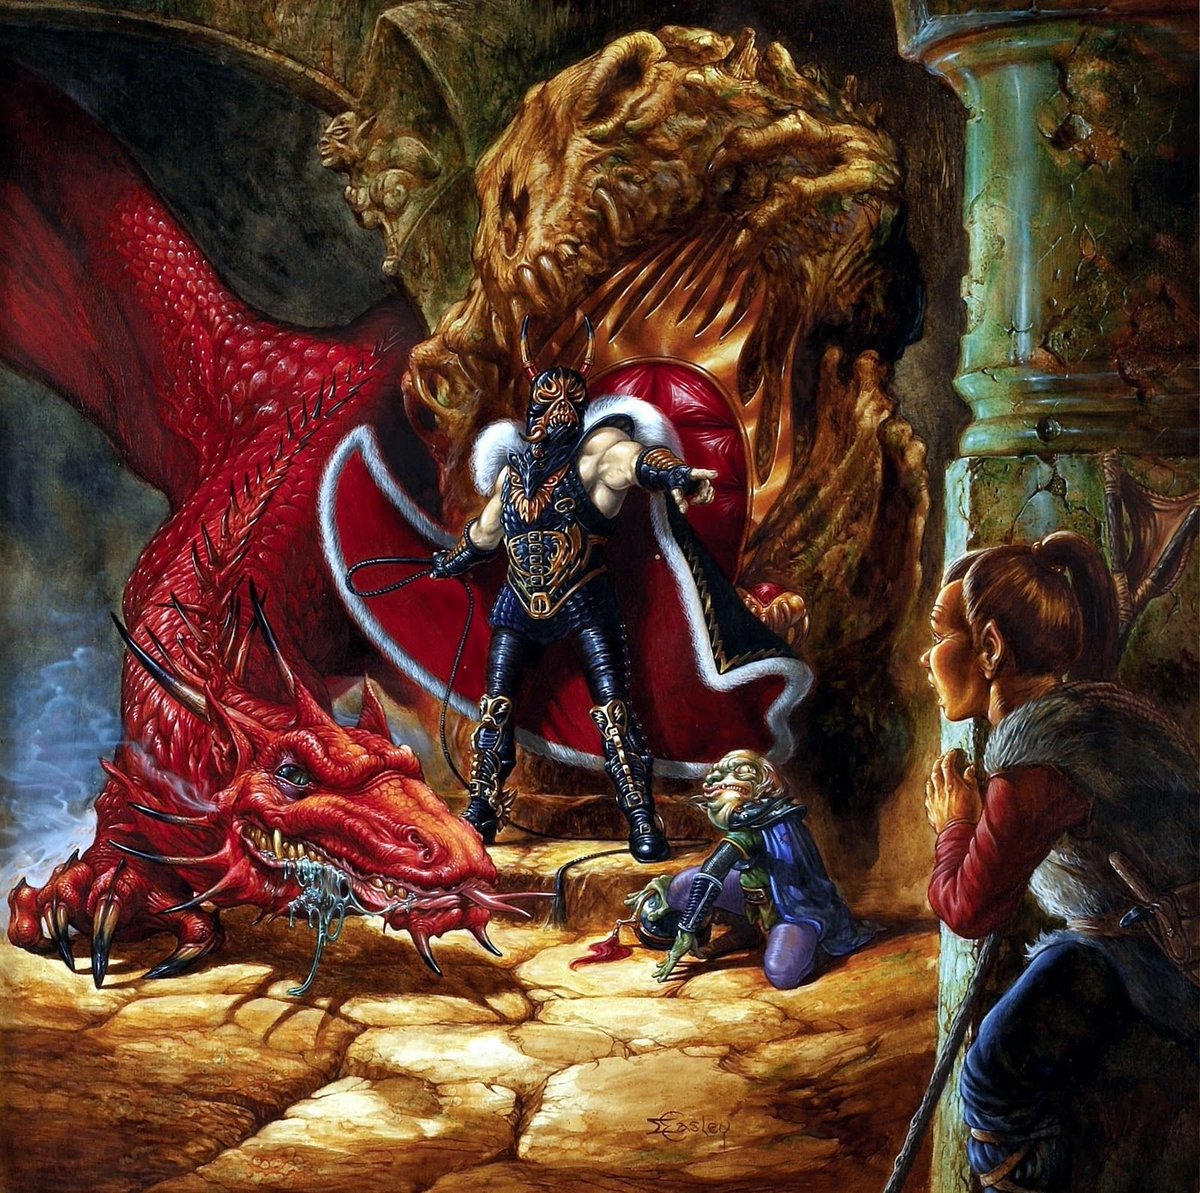 classic Dragons of Flame by Jeff Easley
#dndart